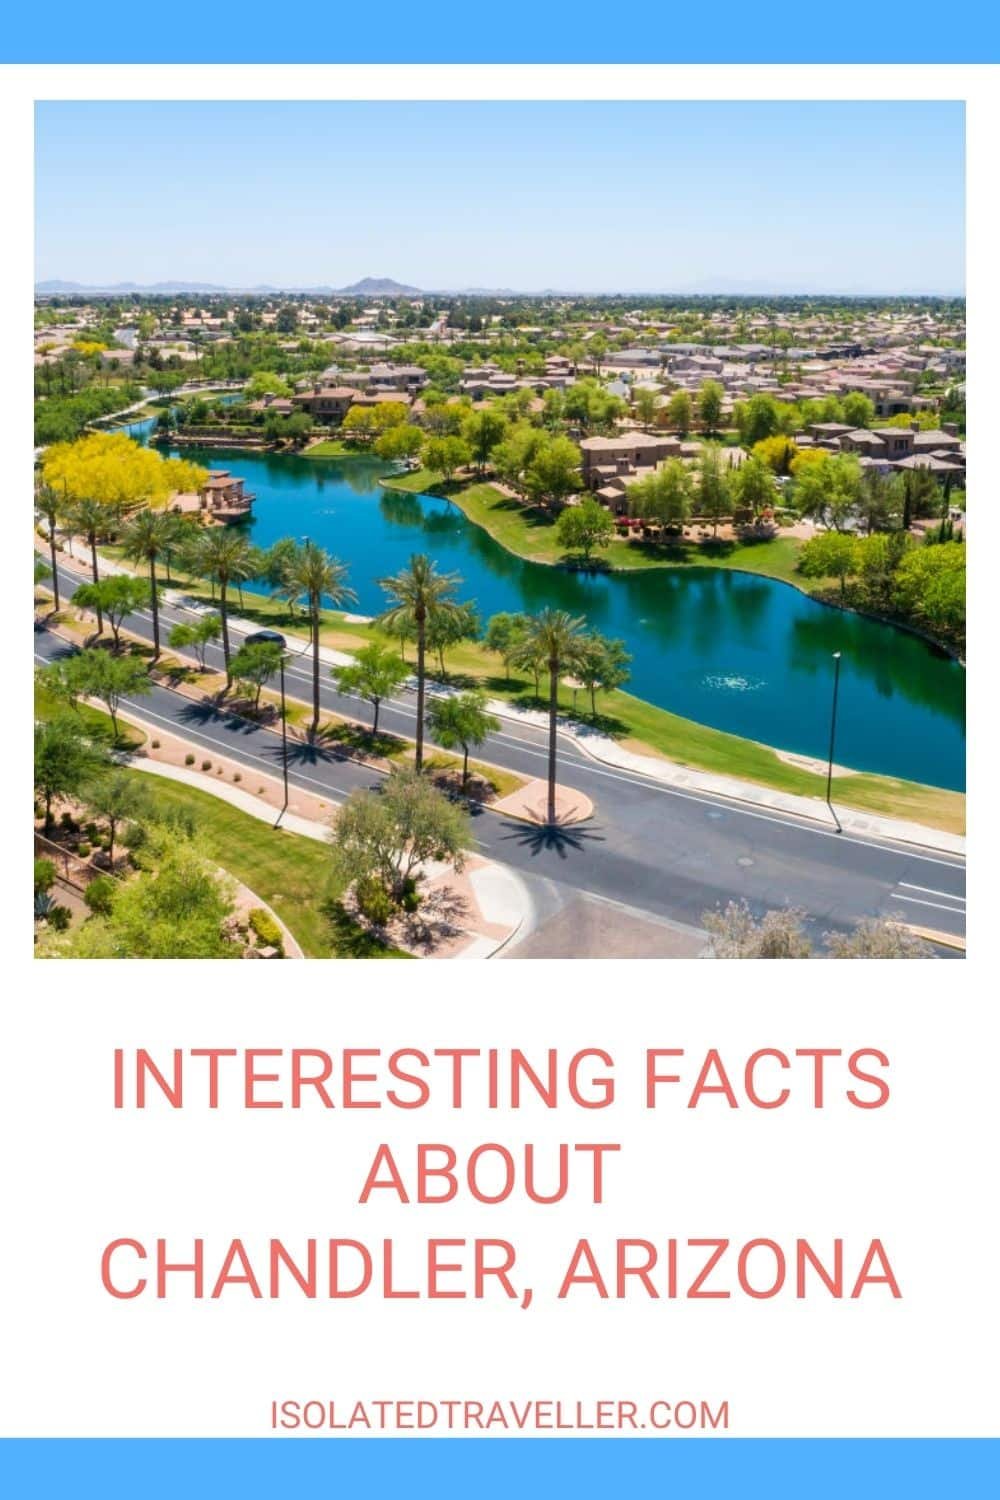 Facts About Chandler